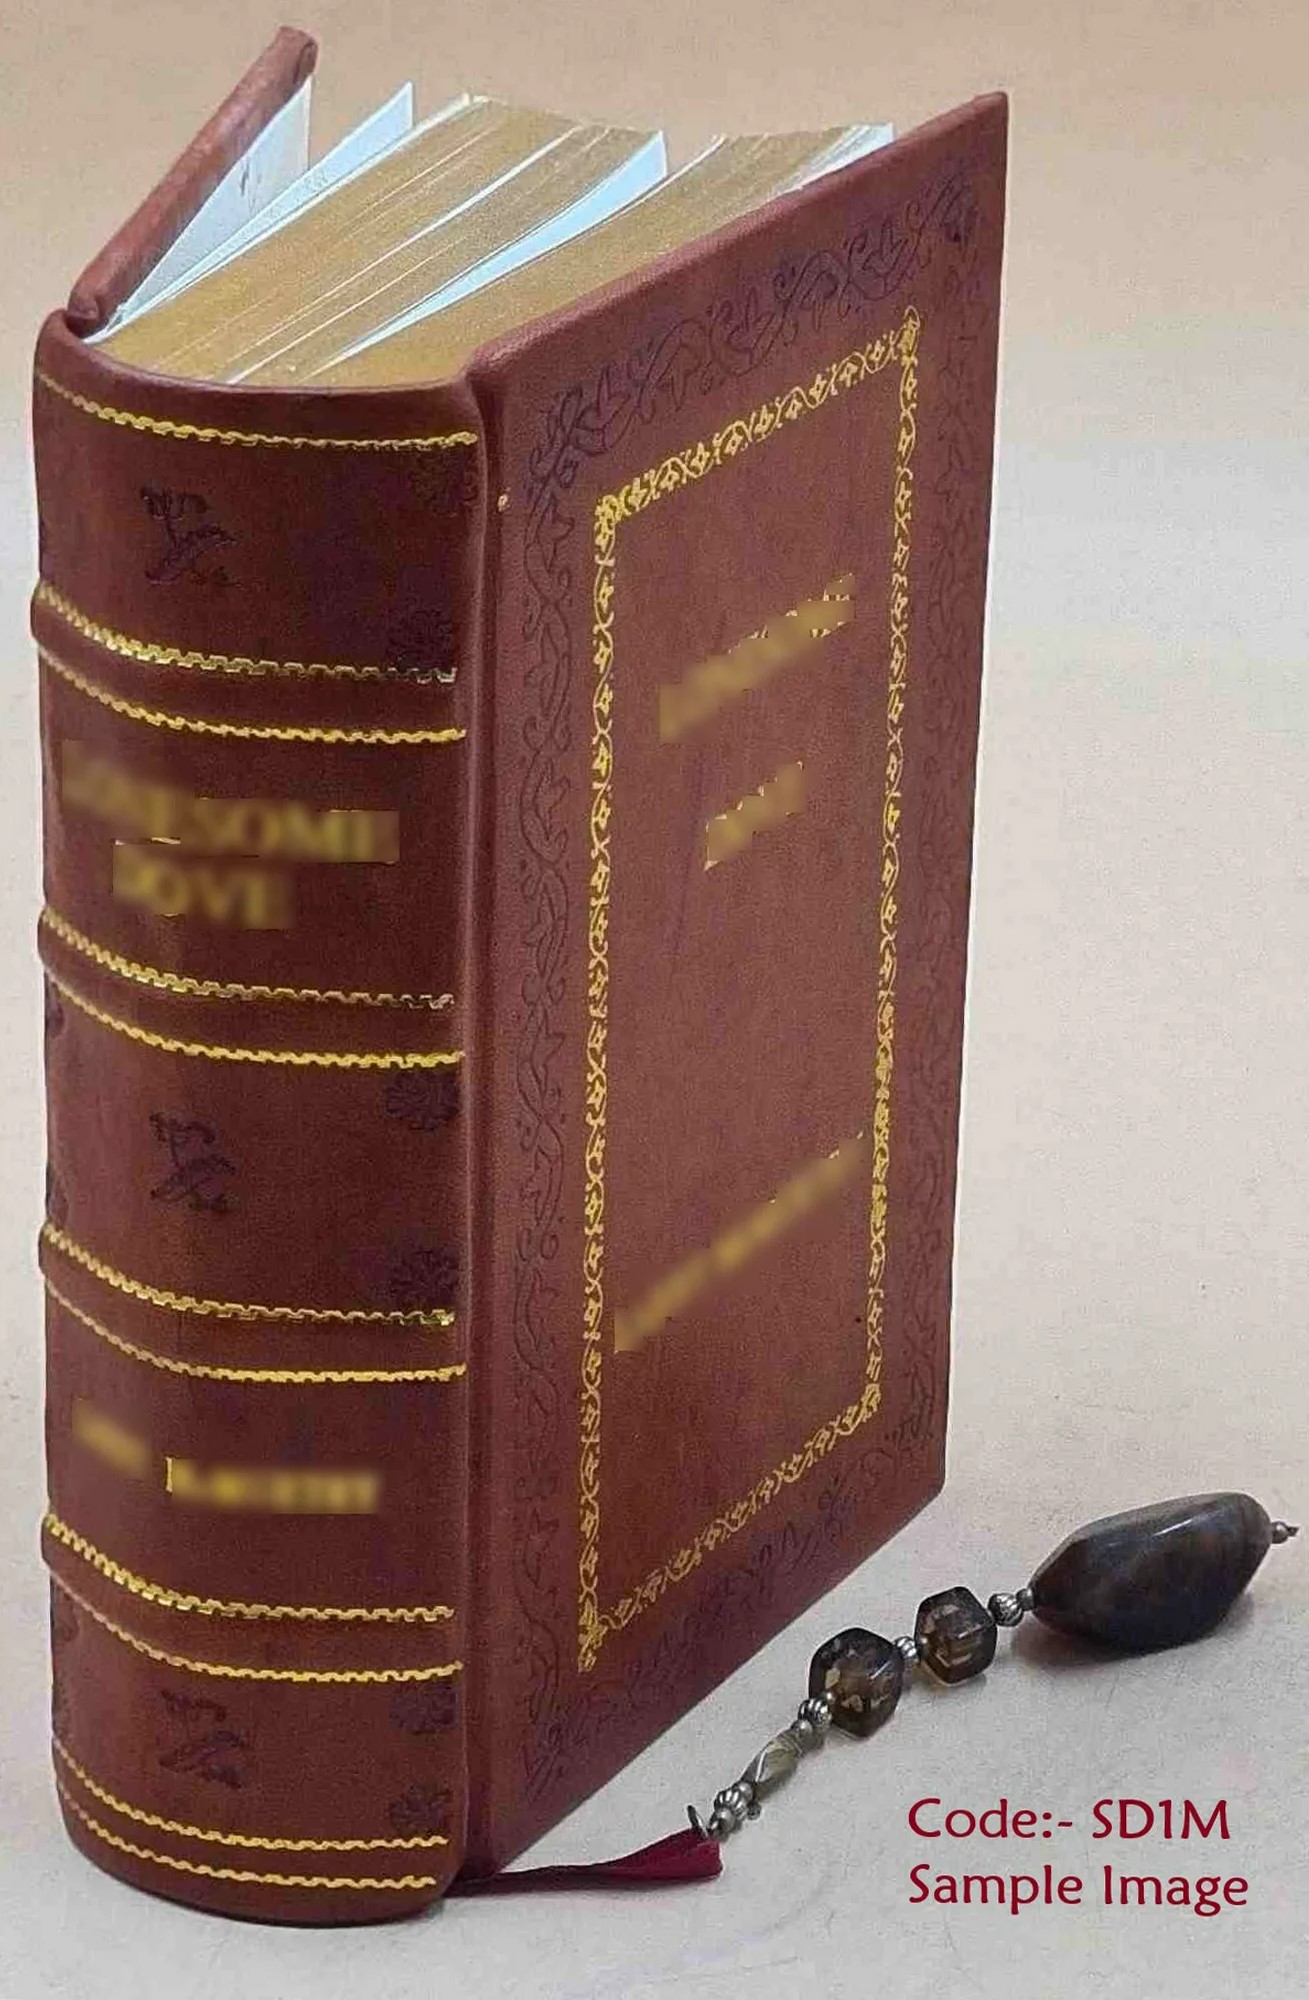 An intermediate Greek-English lexicon, founded upon the seventh edition of Liddell and Scott's Greek-English lexicon 1882 [Premium Leather Edition] - Henry George Liddell, Robert Scott